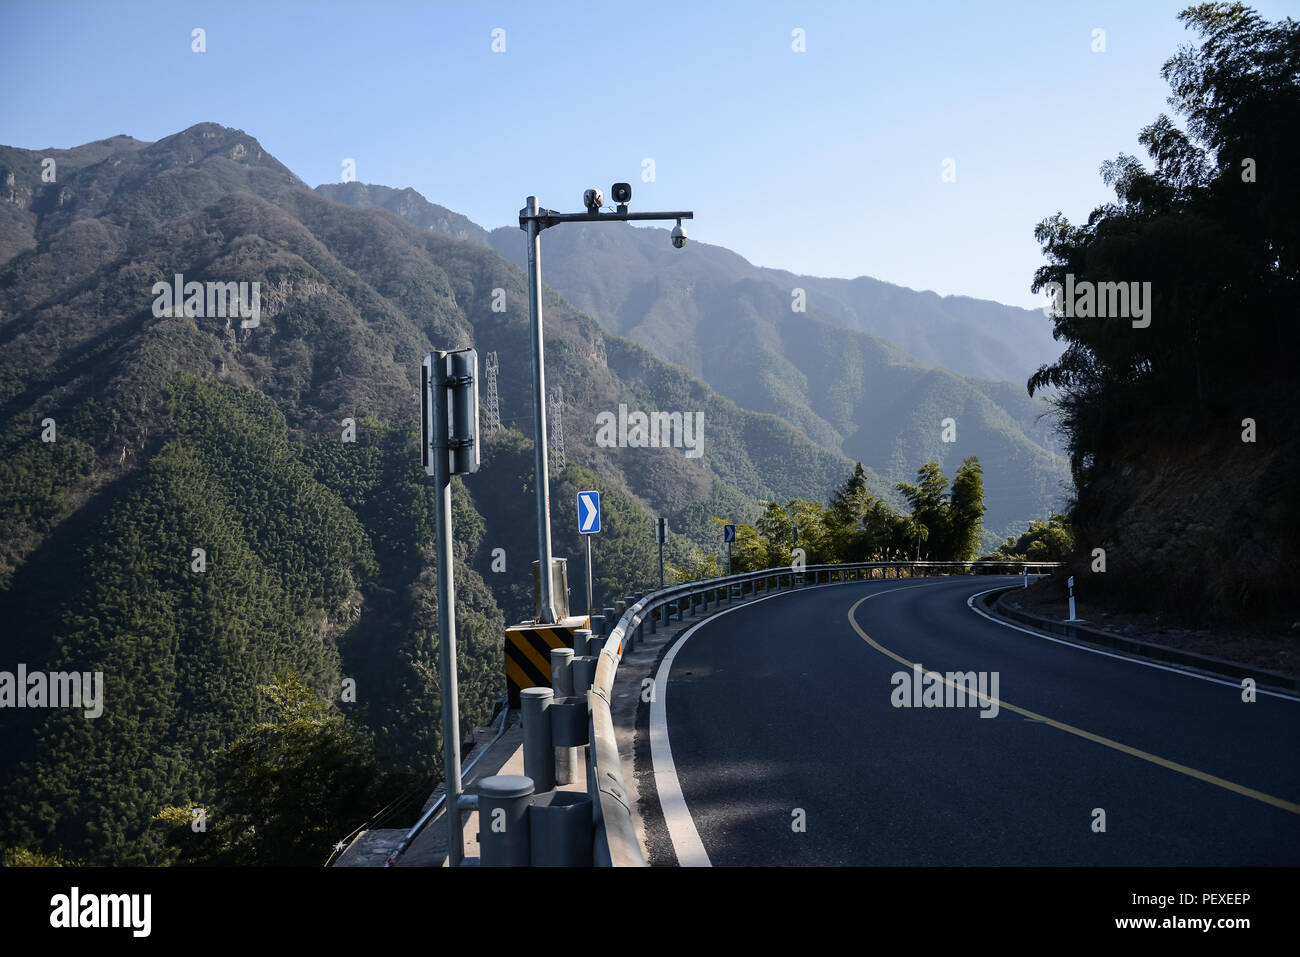 Camera for Traffic Violations on the Road Stock Photo